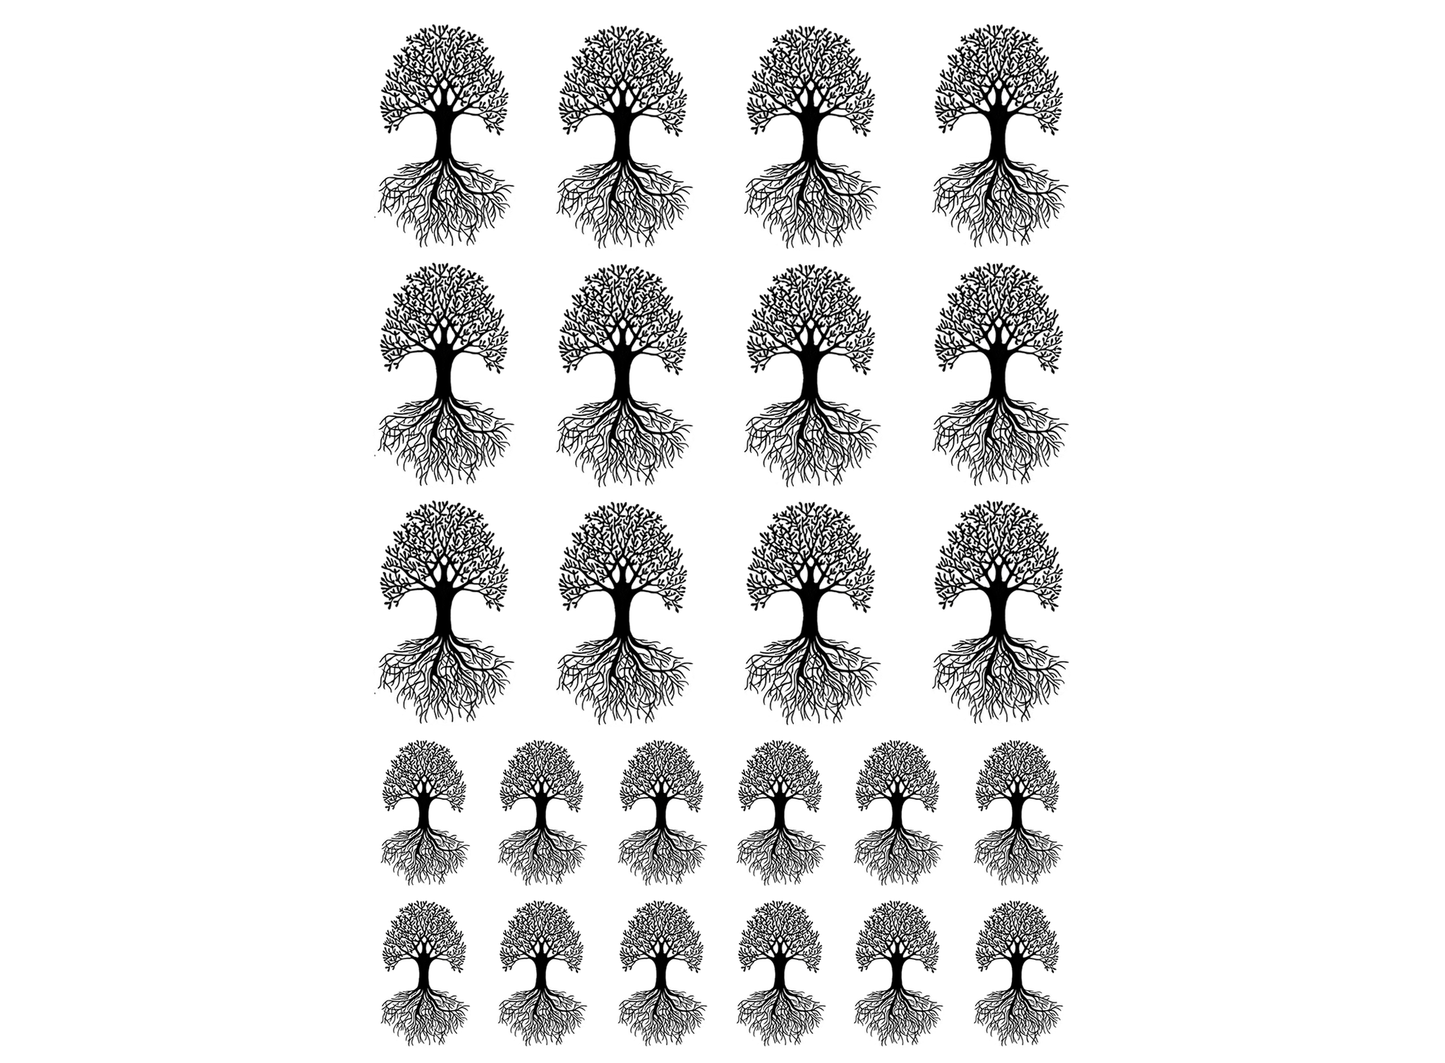 Tree of Life 24 pcs 3/4" to 1-1/8" Black Fused Glass Decals